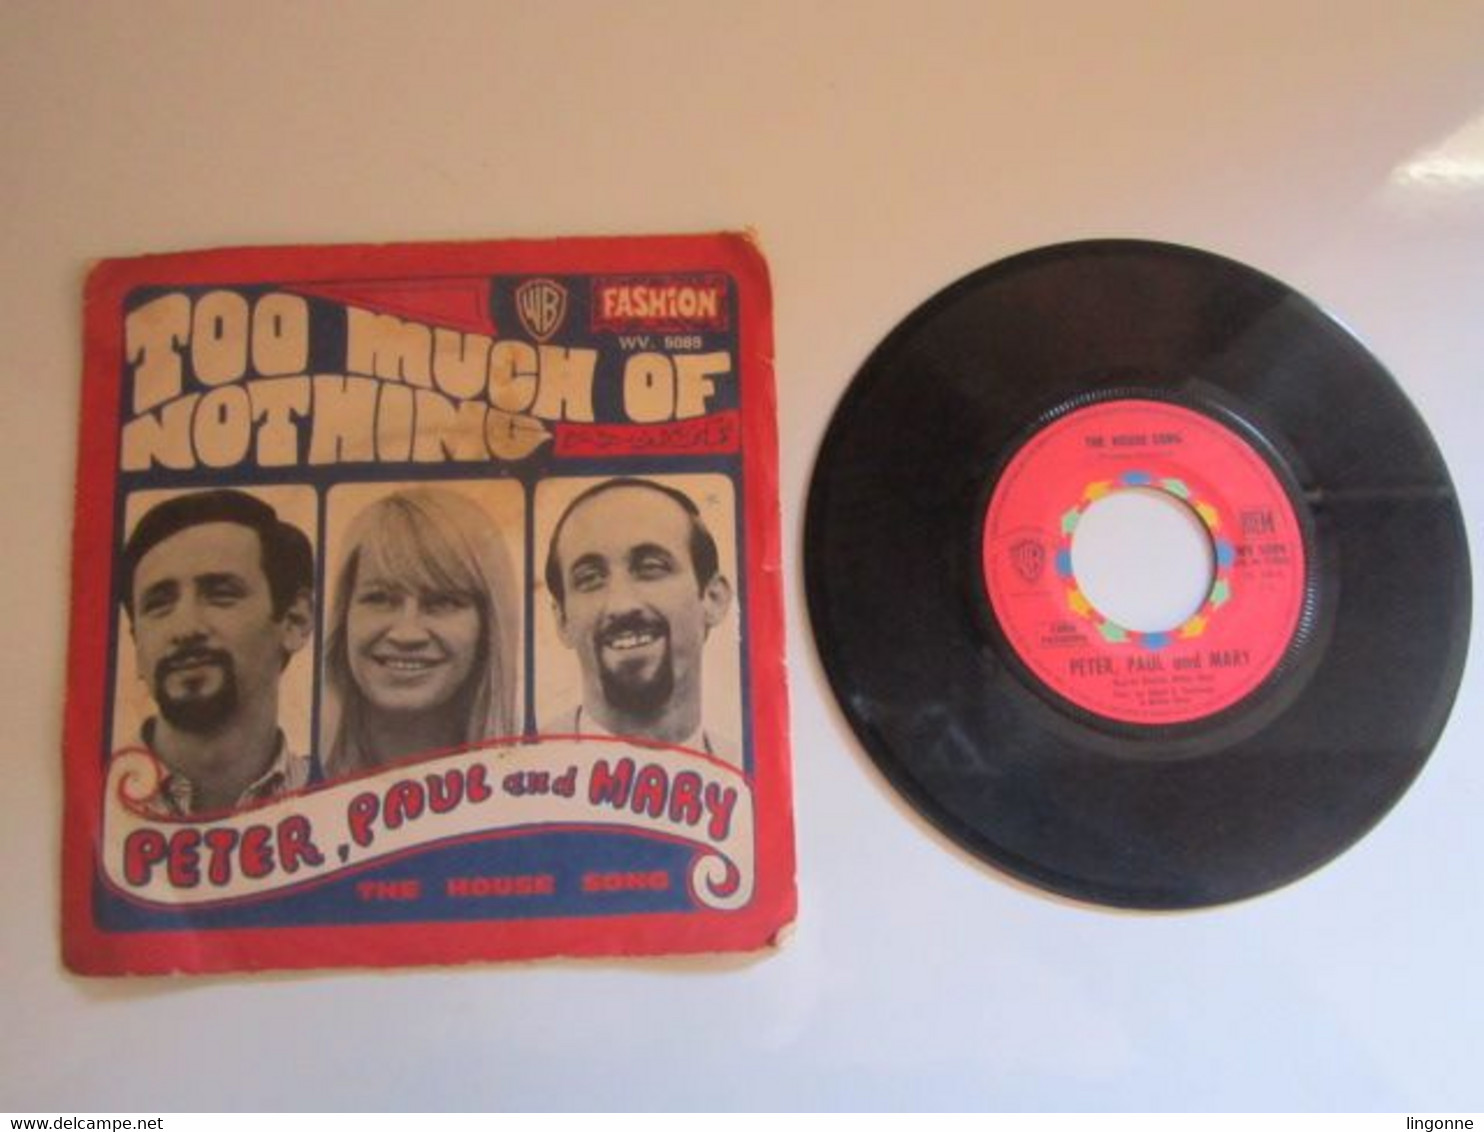 1968 Vinyle 45 Tours Peter, Paul And Mary – Too Much Of Nothing - Country En Folk